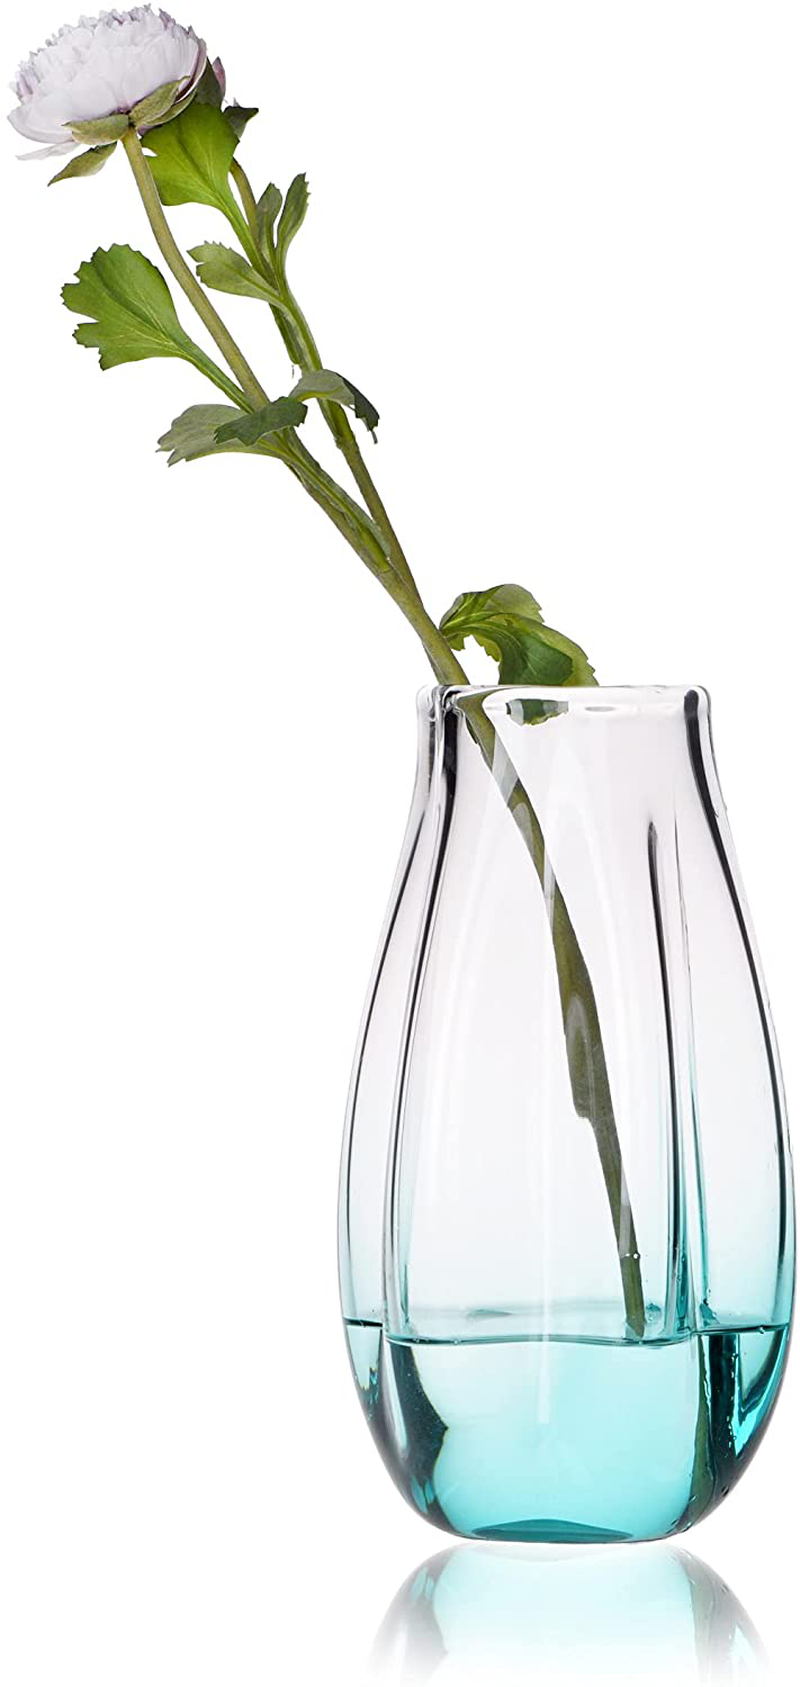 CONVIVA Glass Vase Hand Blown for Flower Centerpiece Home Decorative Tabletop Solid Blue Color Organic Wrinkle Shape for Living Room Kitchen Dining Porch Bookcase Gift Decor 13 inch H Home & Garden > Decor > Vases CONVIVA Green 10'' H 